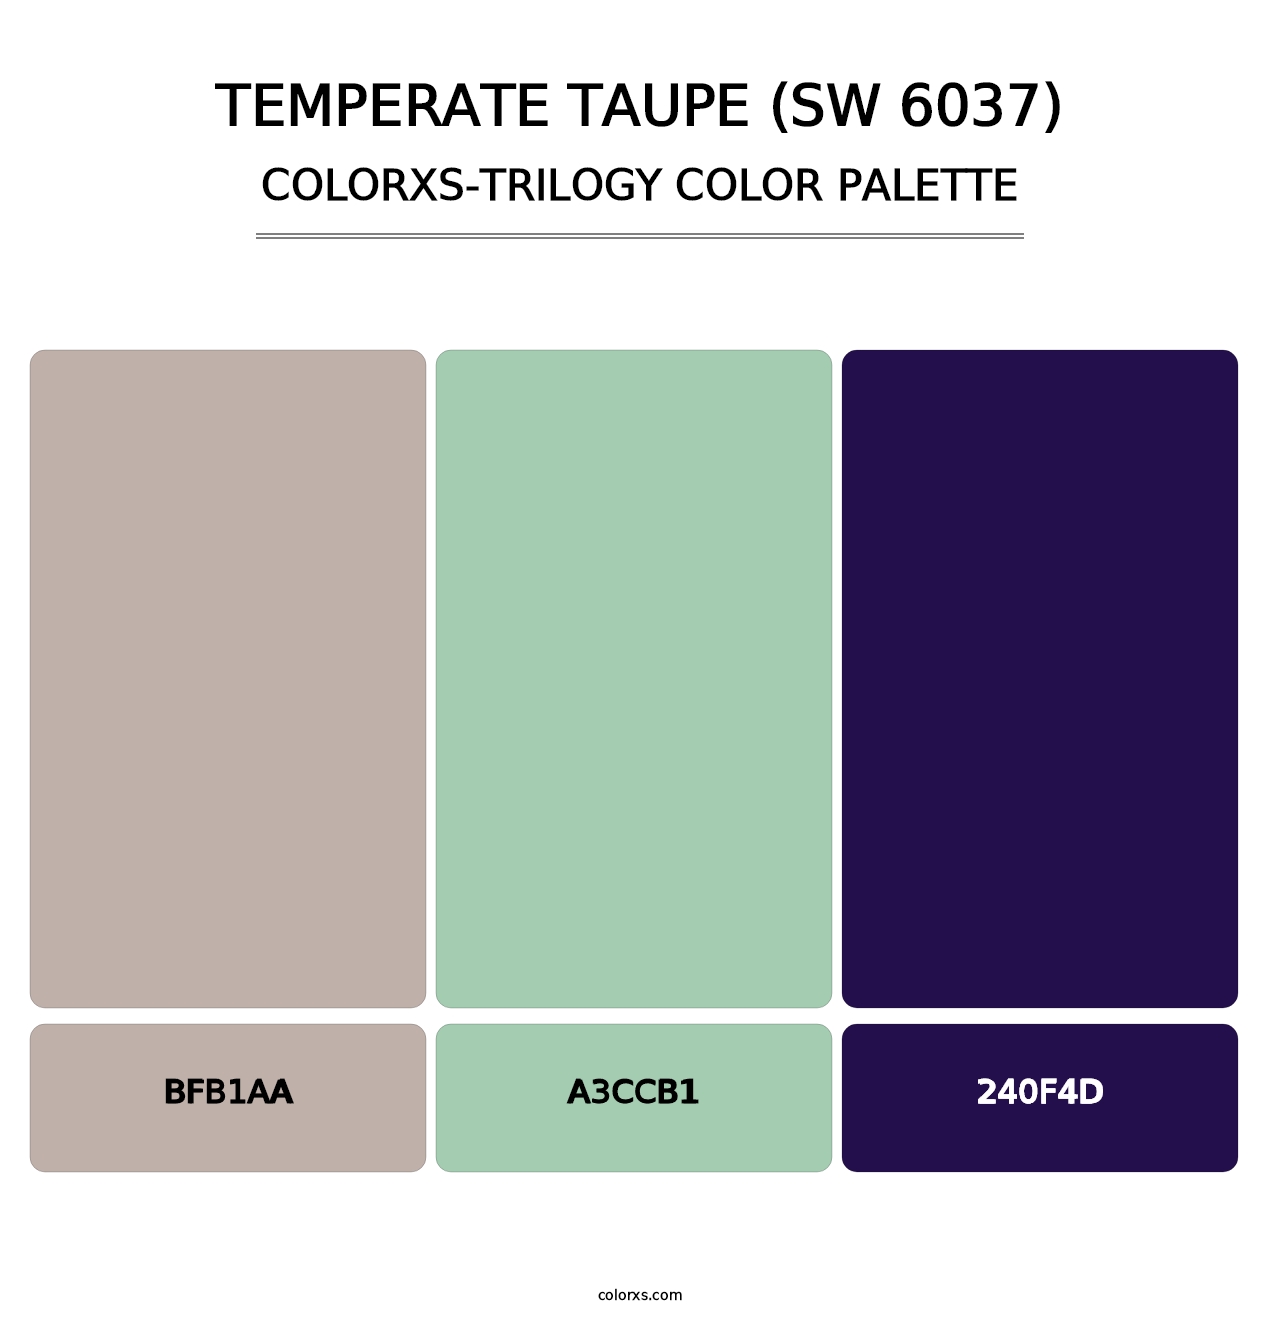 Temperate Taupe (SW 6037) - Colorxs Trilogy Palette